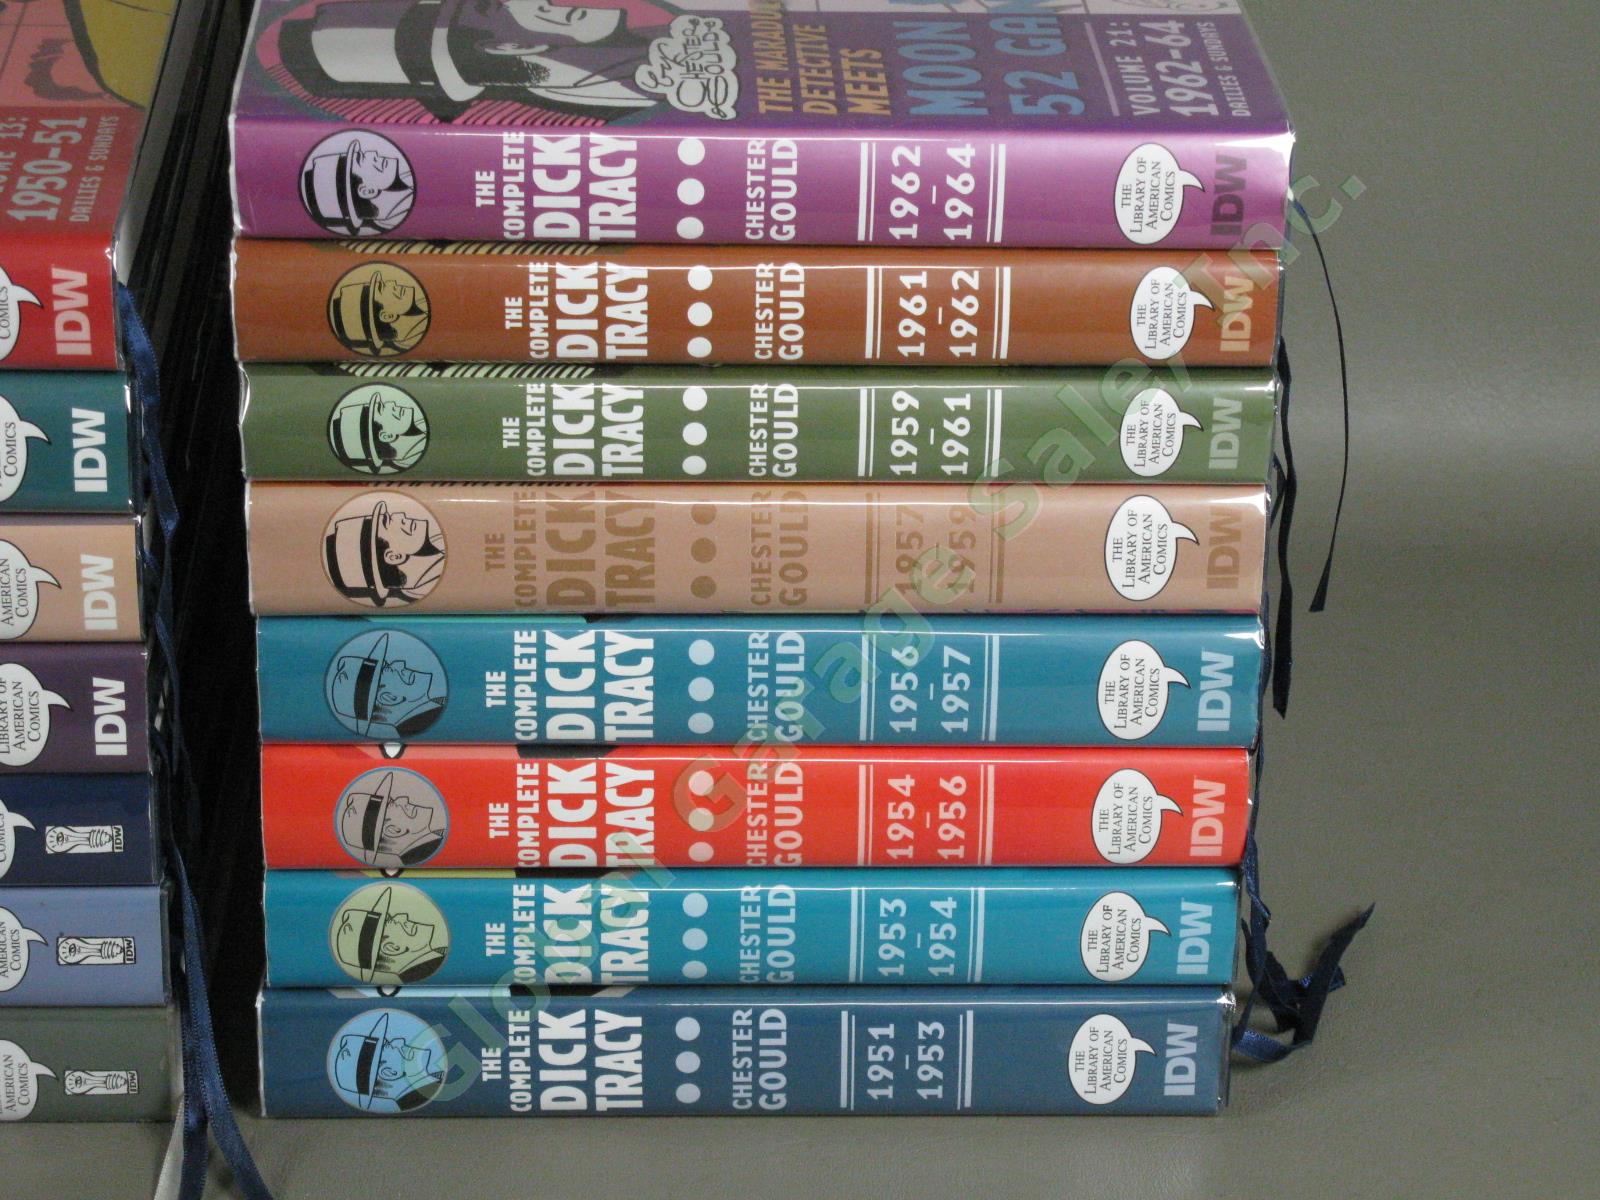 21 Complete Dick Tracy Book Set 1-21 LOT 1st Edition Vol 7 & 8 Near Mint NR 9